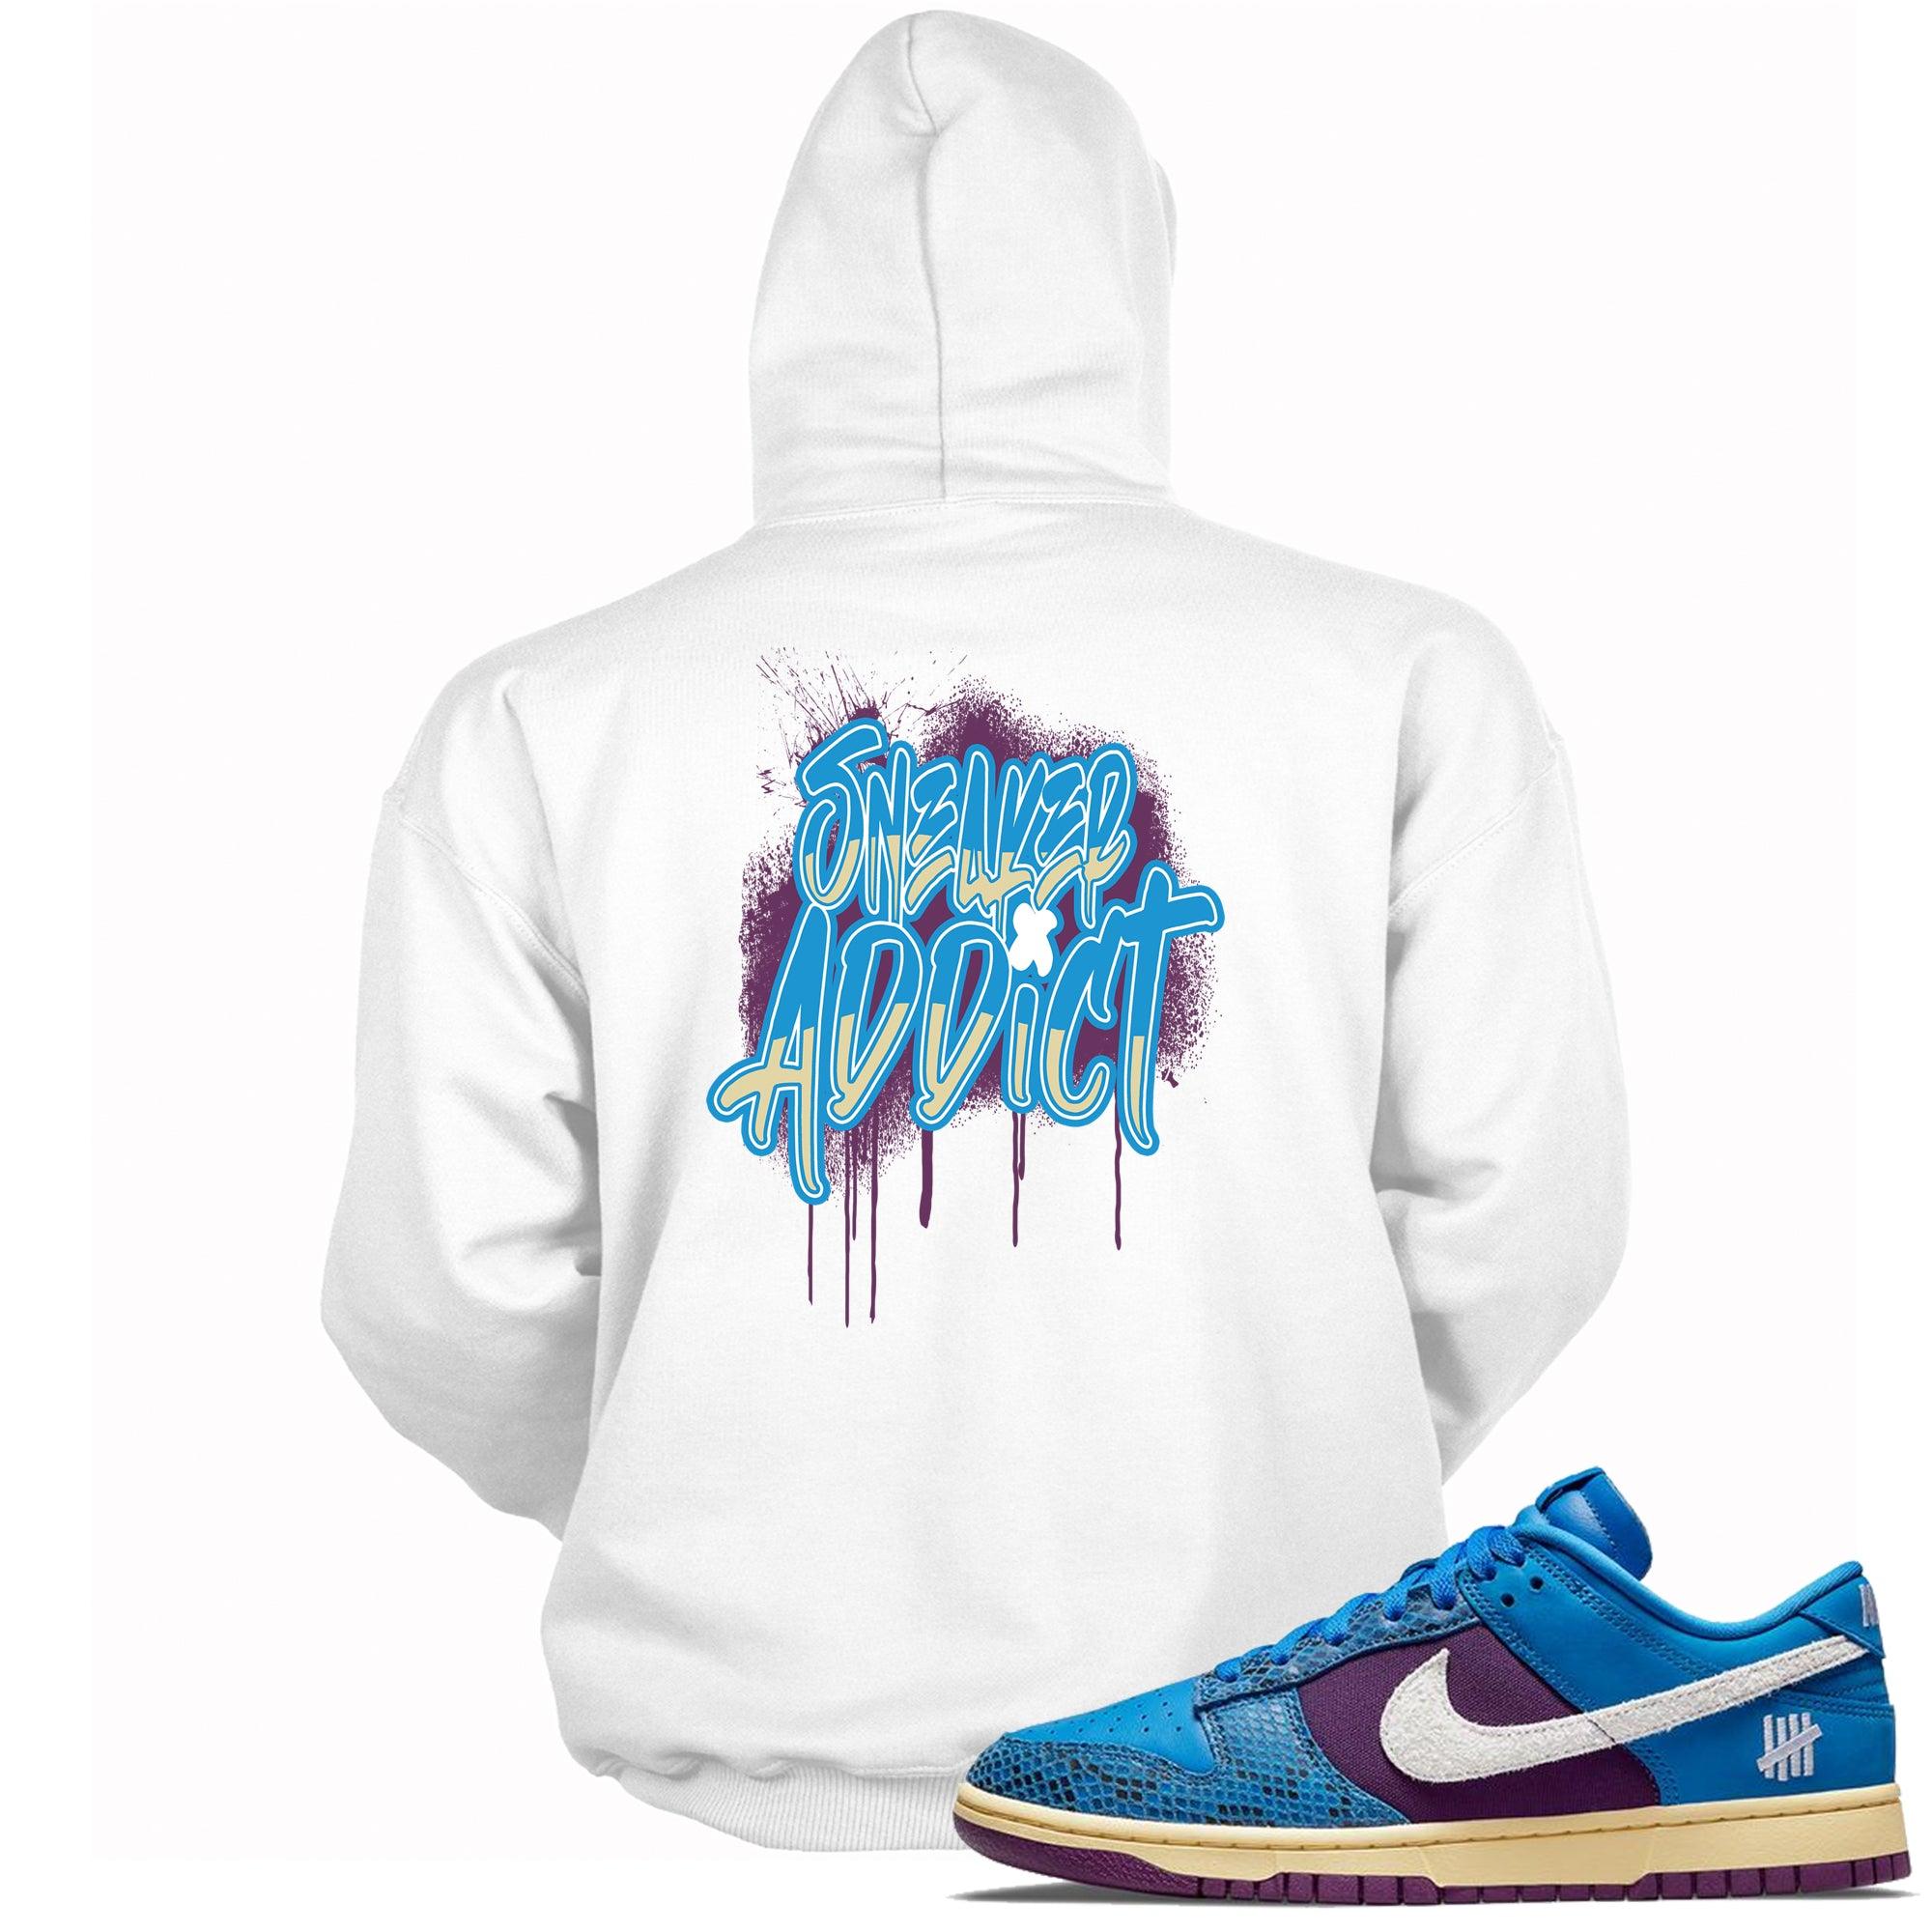 Sneaker Addict Hoodie Nike Dunks Low Undefeated 5 On It Dunk vs AF1 photo